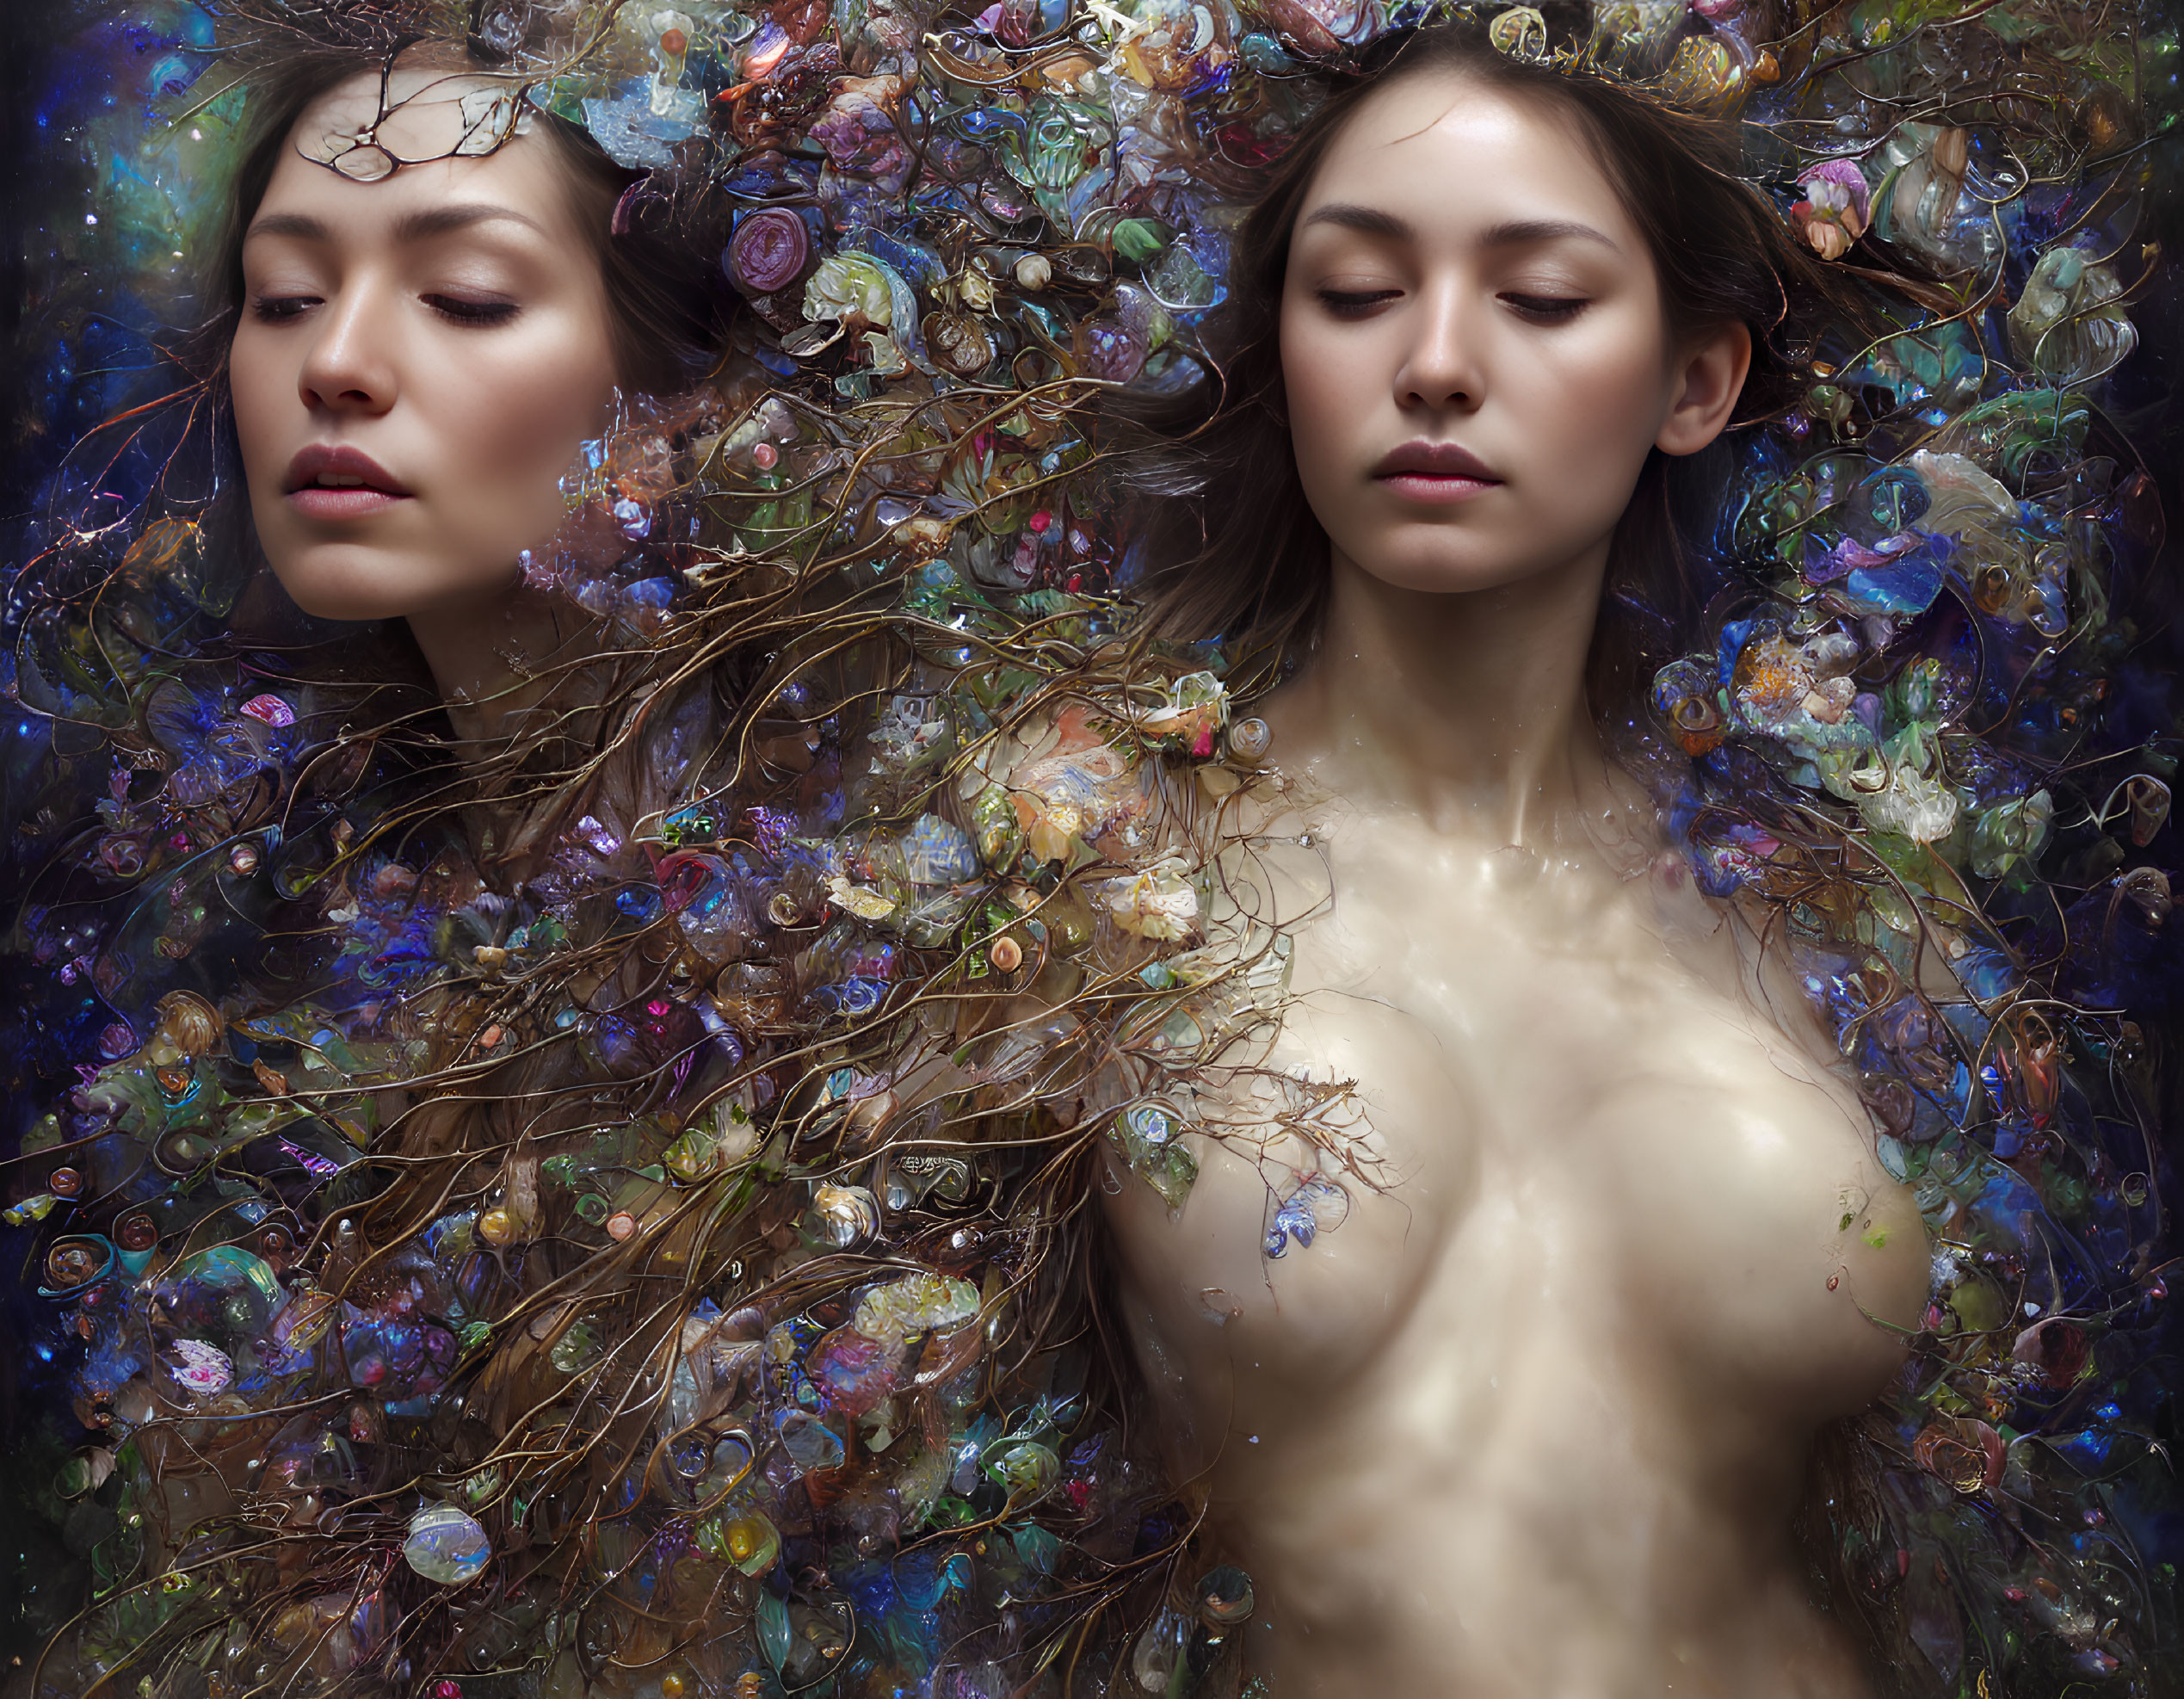 Two people in a floral and branch-filled dreamy scene with one adorned in a delicate headpiece.